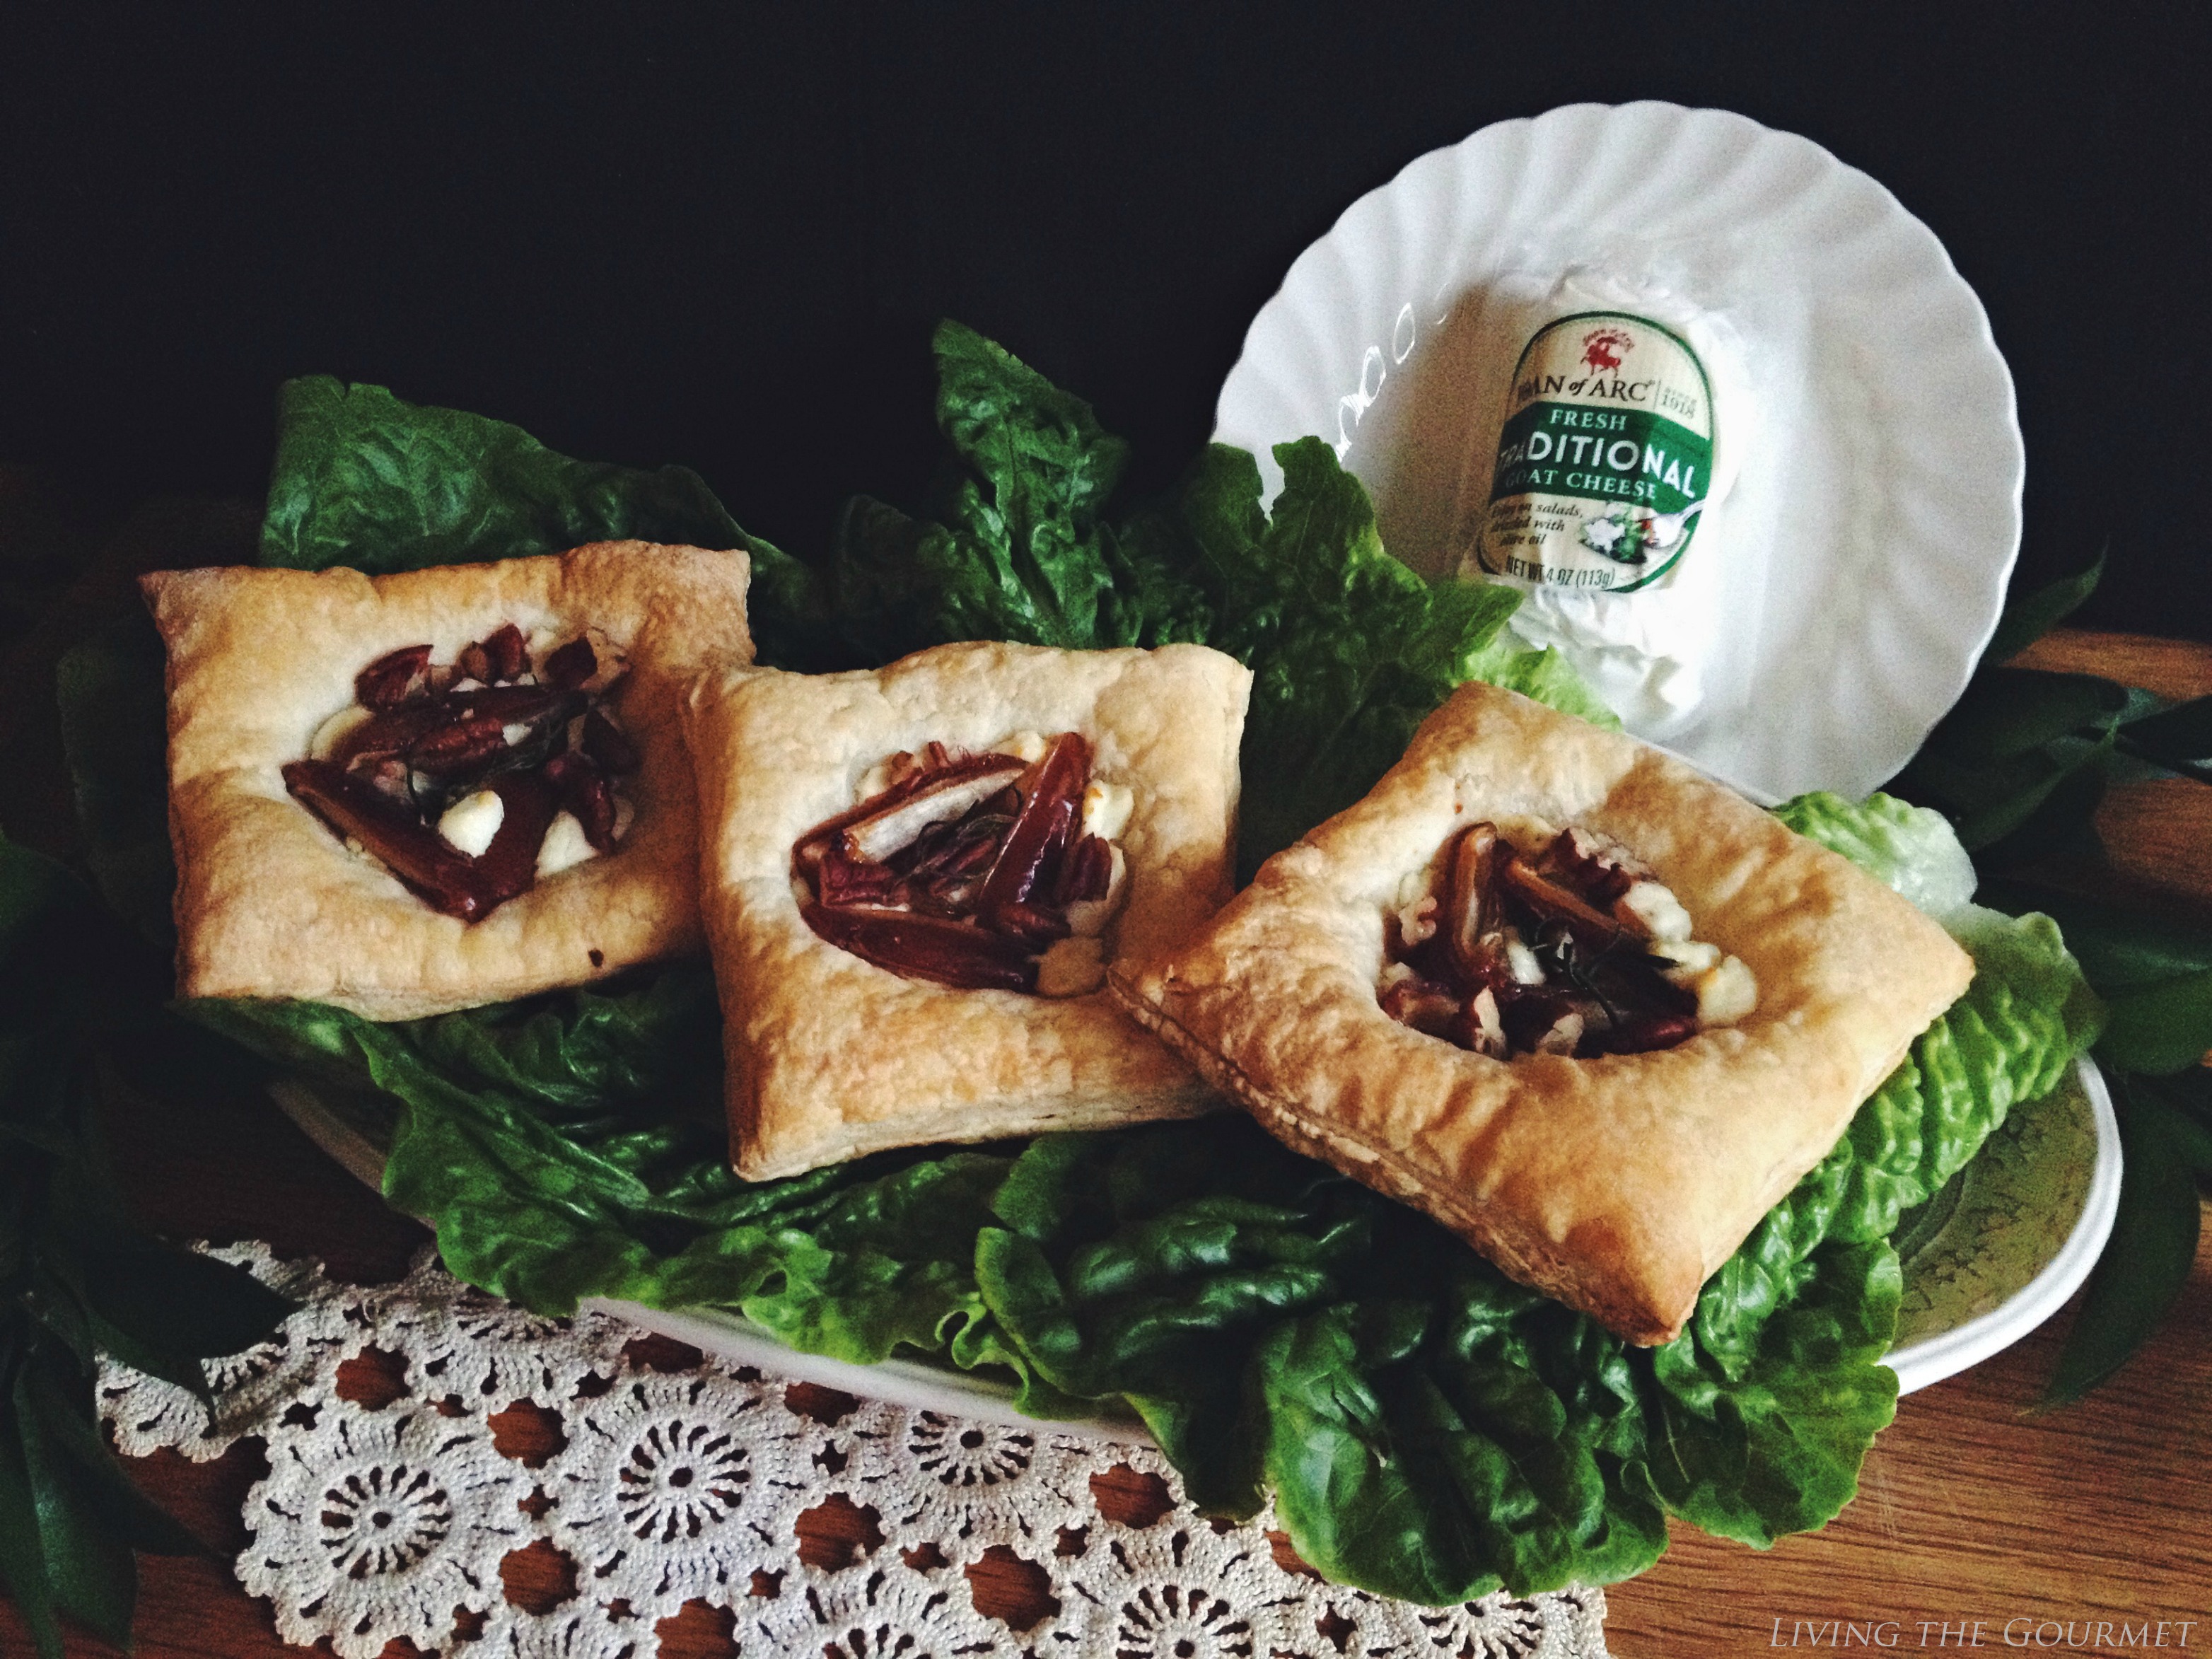 Living the Gourmet: Goat Cheese Tarts & $25 Giveaway